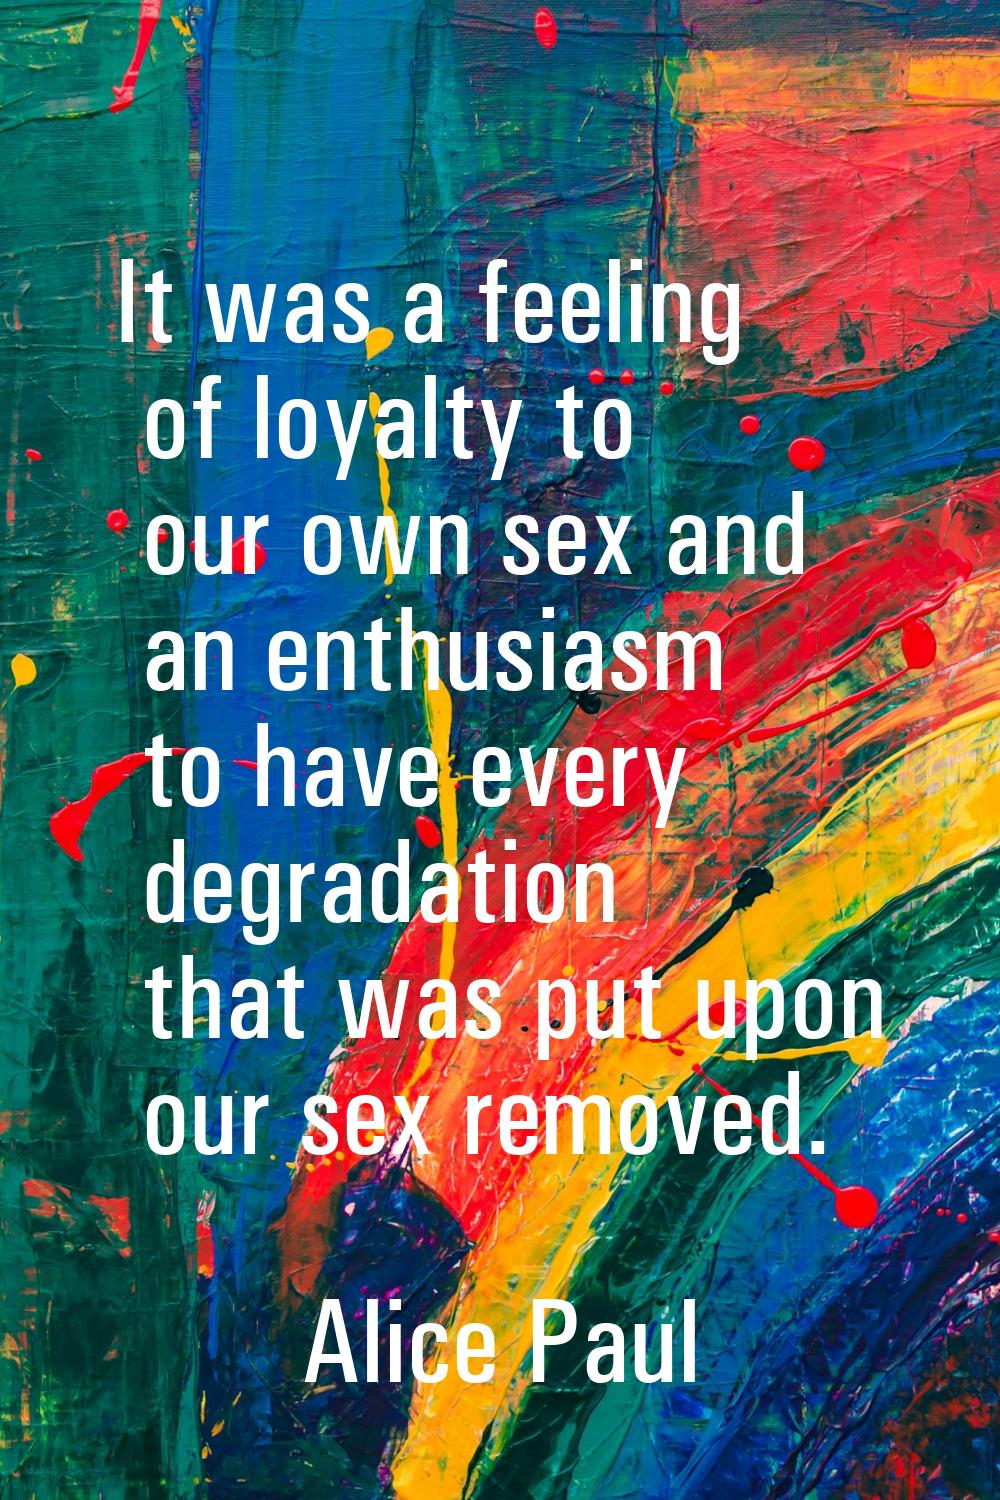 It was a feeling of loyalty to our own sex and an enthusiasm to have every degradation that was put